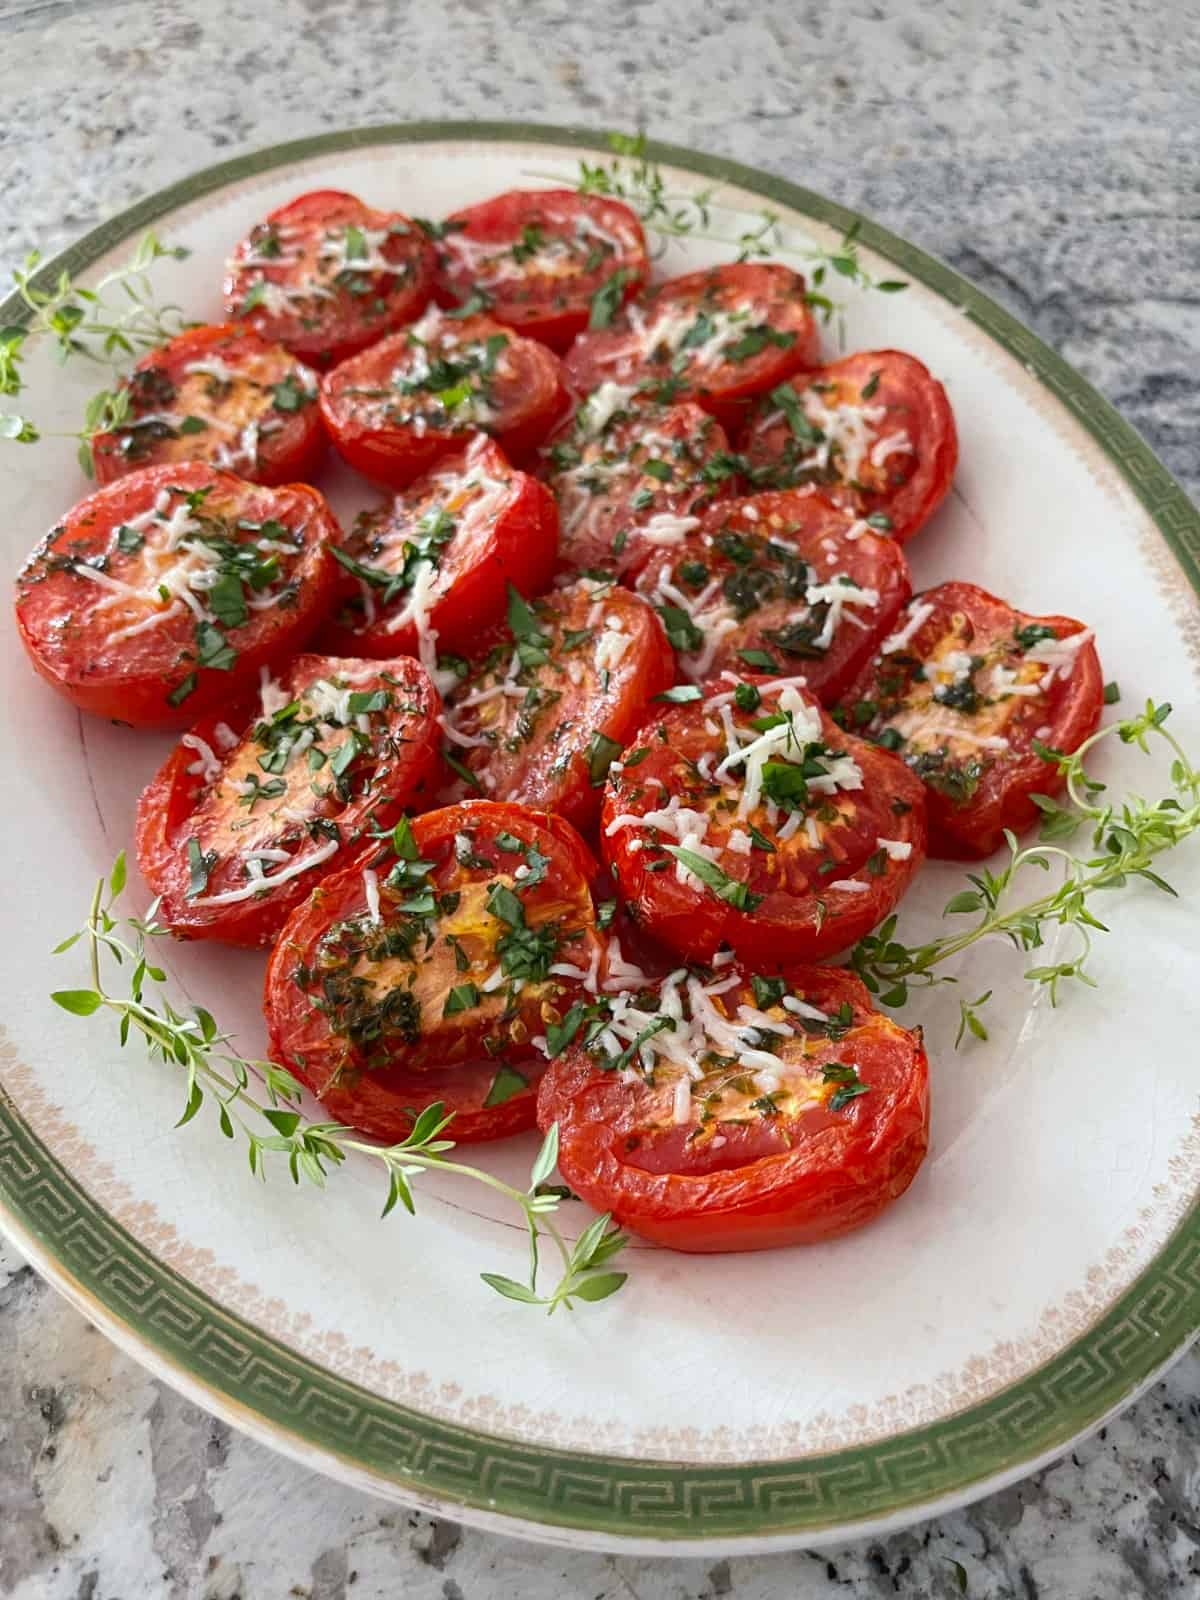 Parmesan broiled tomatoes topped with fresh chopped basil on vintage serving platter garnished with fresh thyme.